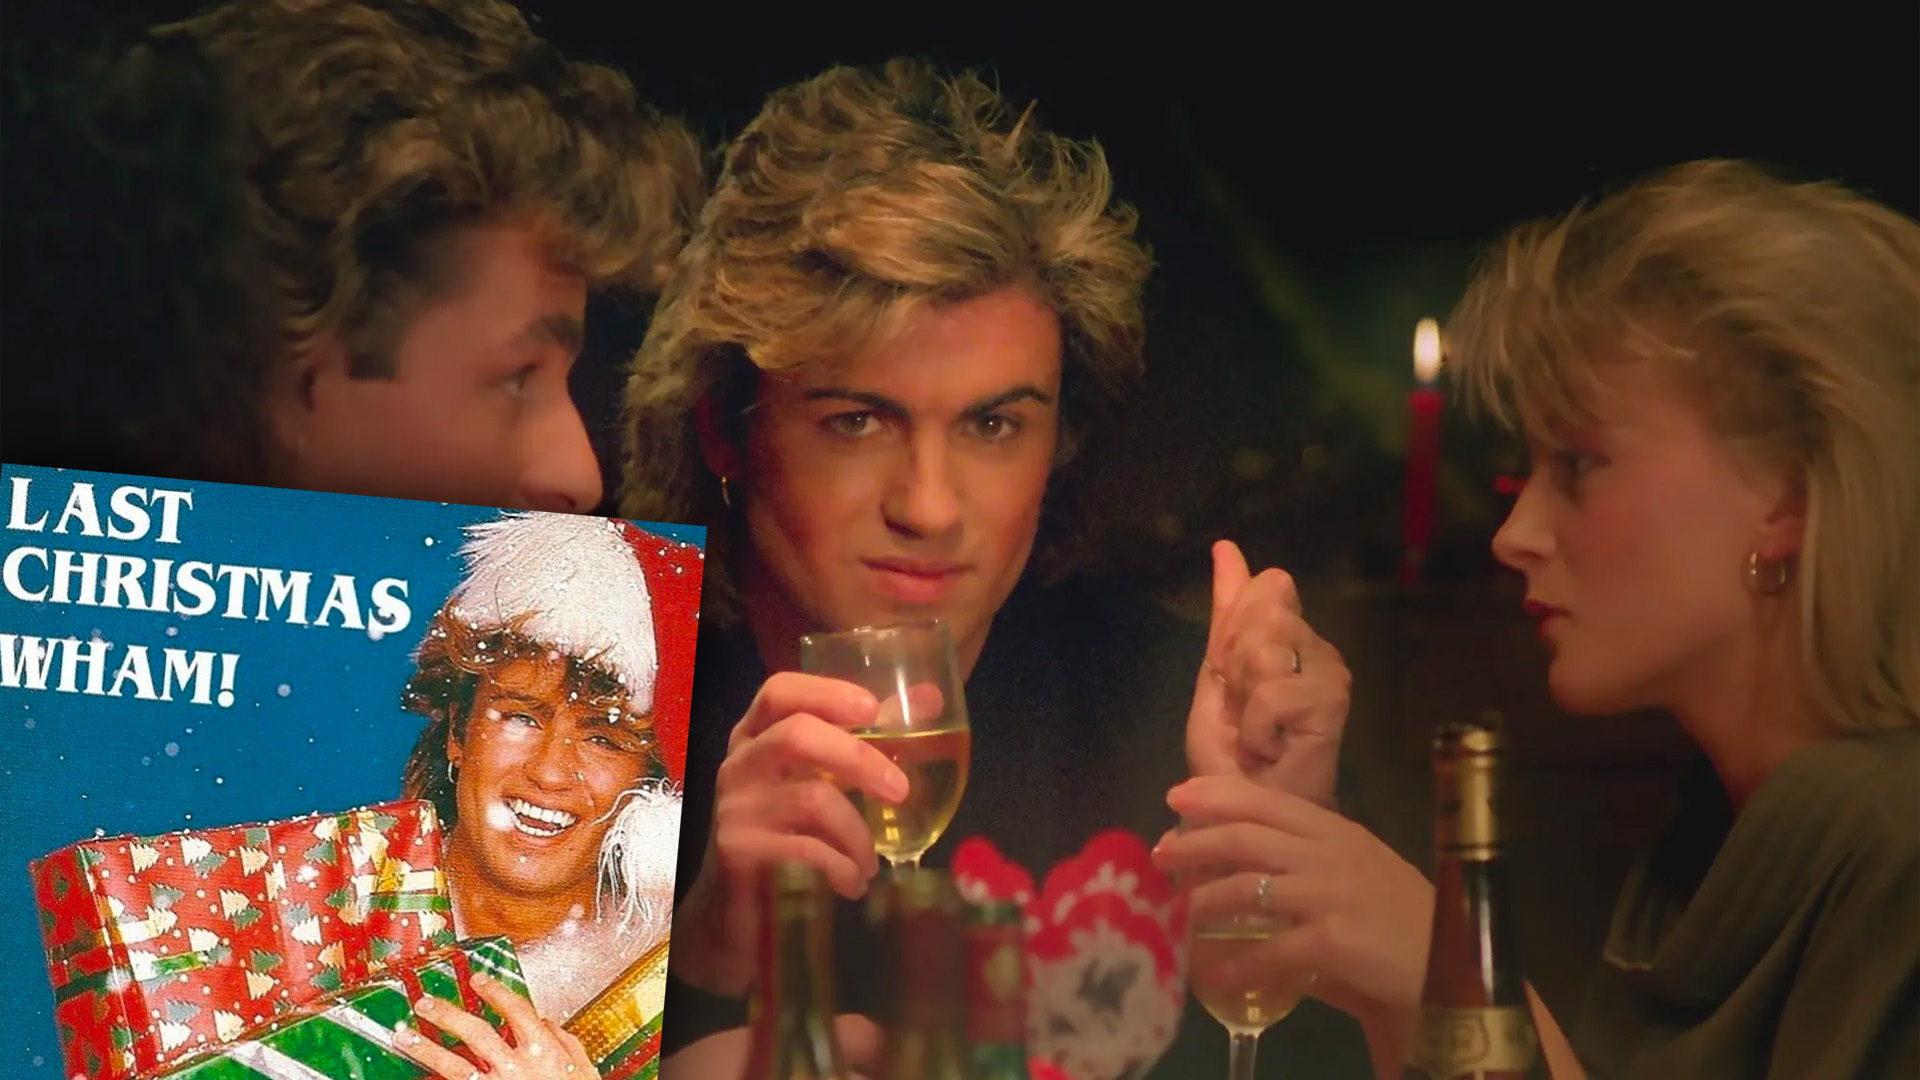 Wham!'s 'Last Christmas' Finally Reaches Number 1 After 39 Years